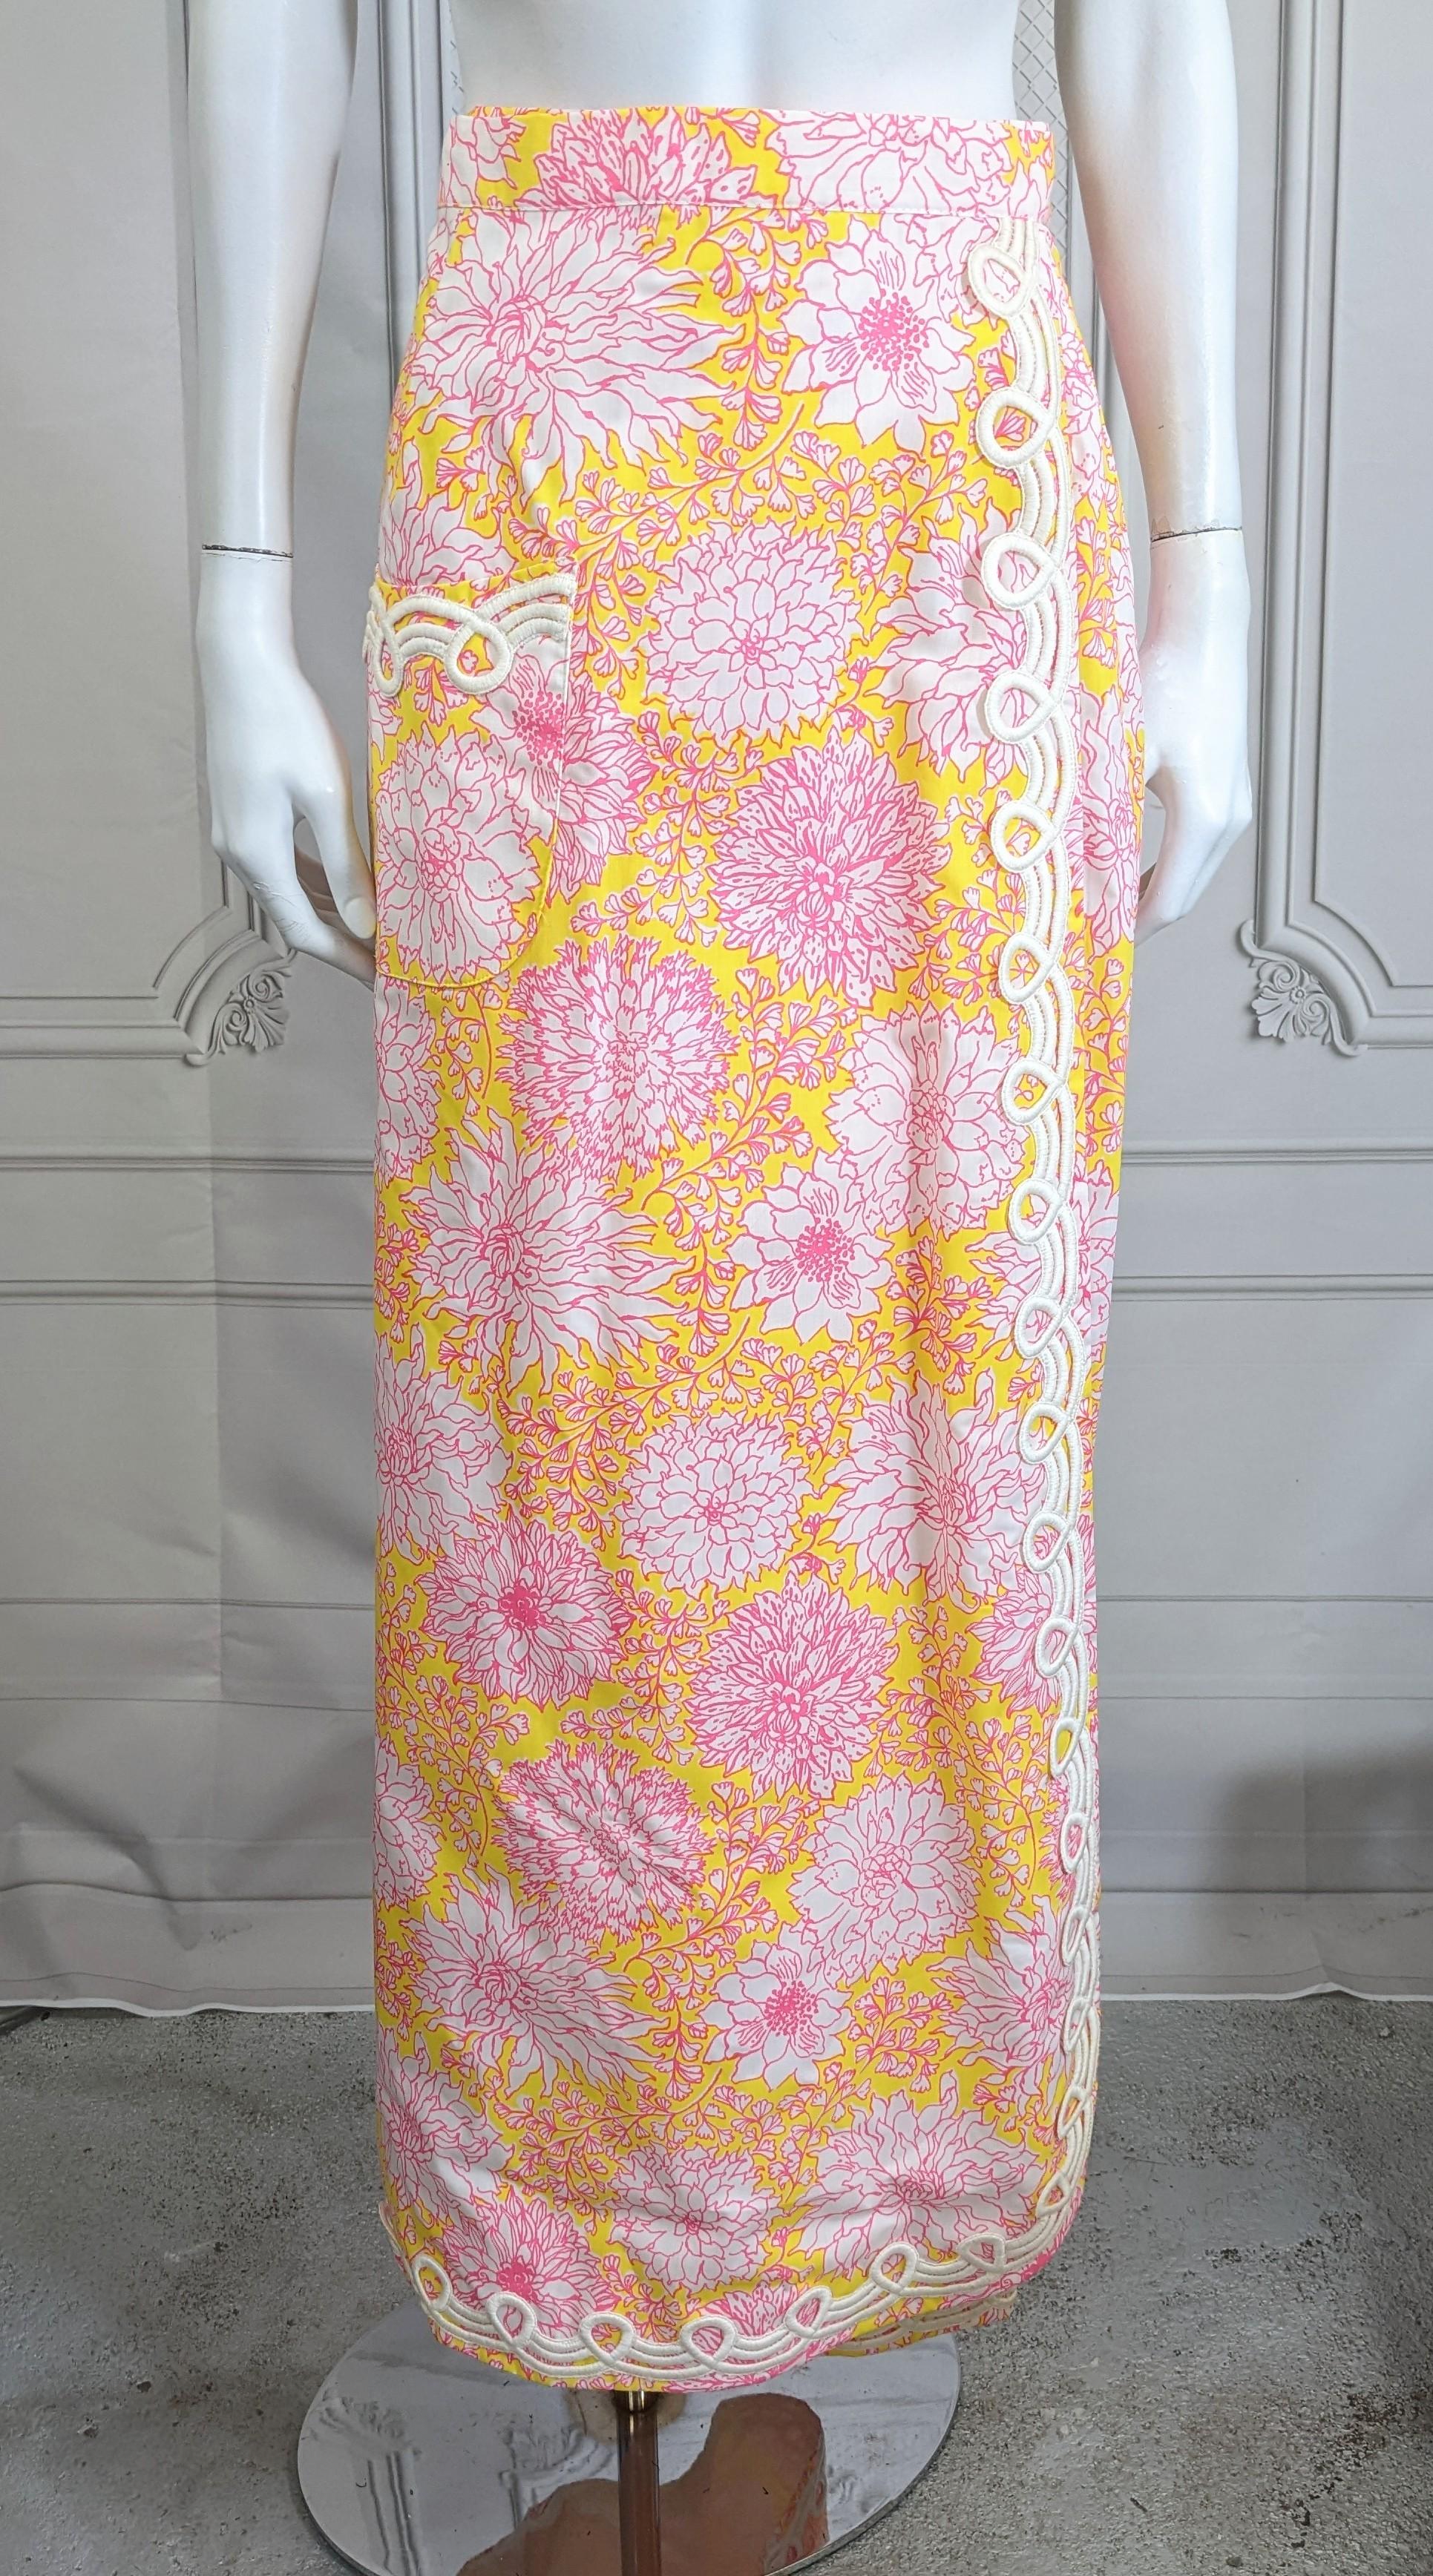 Festive Lily Pulitzer Soutache Trimmed Flared Maxi Wrap Skirt from the 1960's. Vibrant pink and yellow floral print with lining. One patch pocket with soutache edge on hem as well.
Size Medium, 1960's USA. 